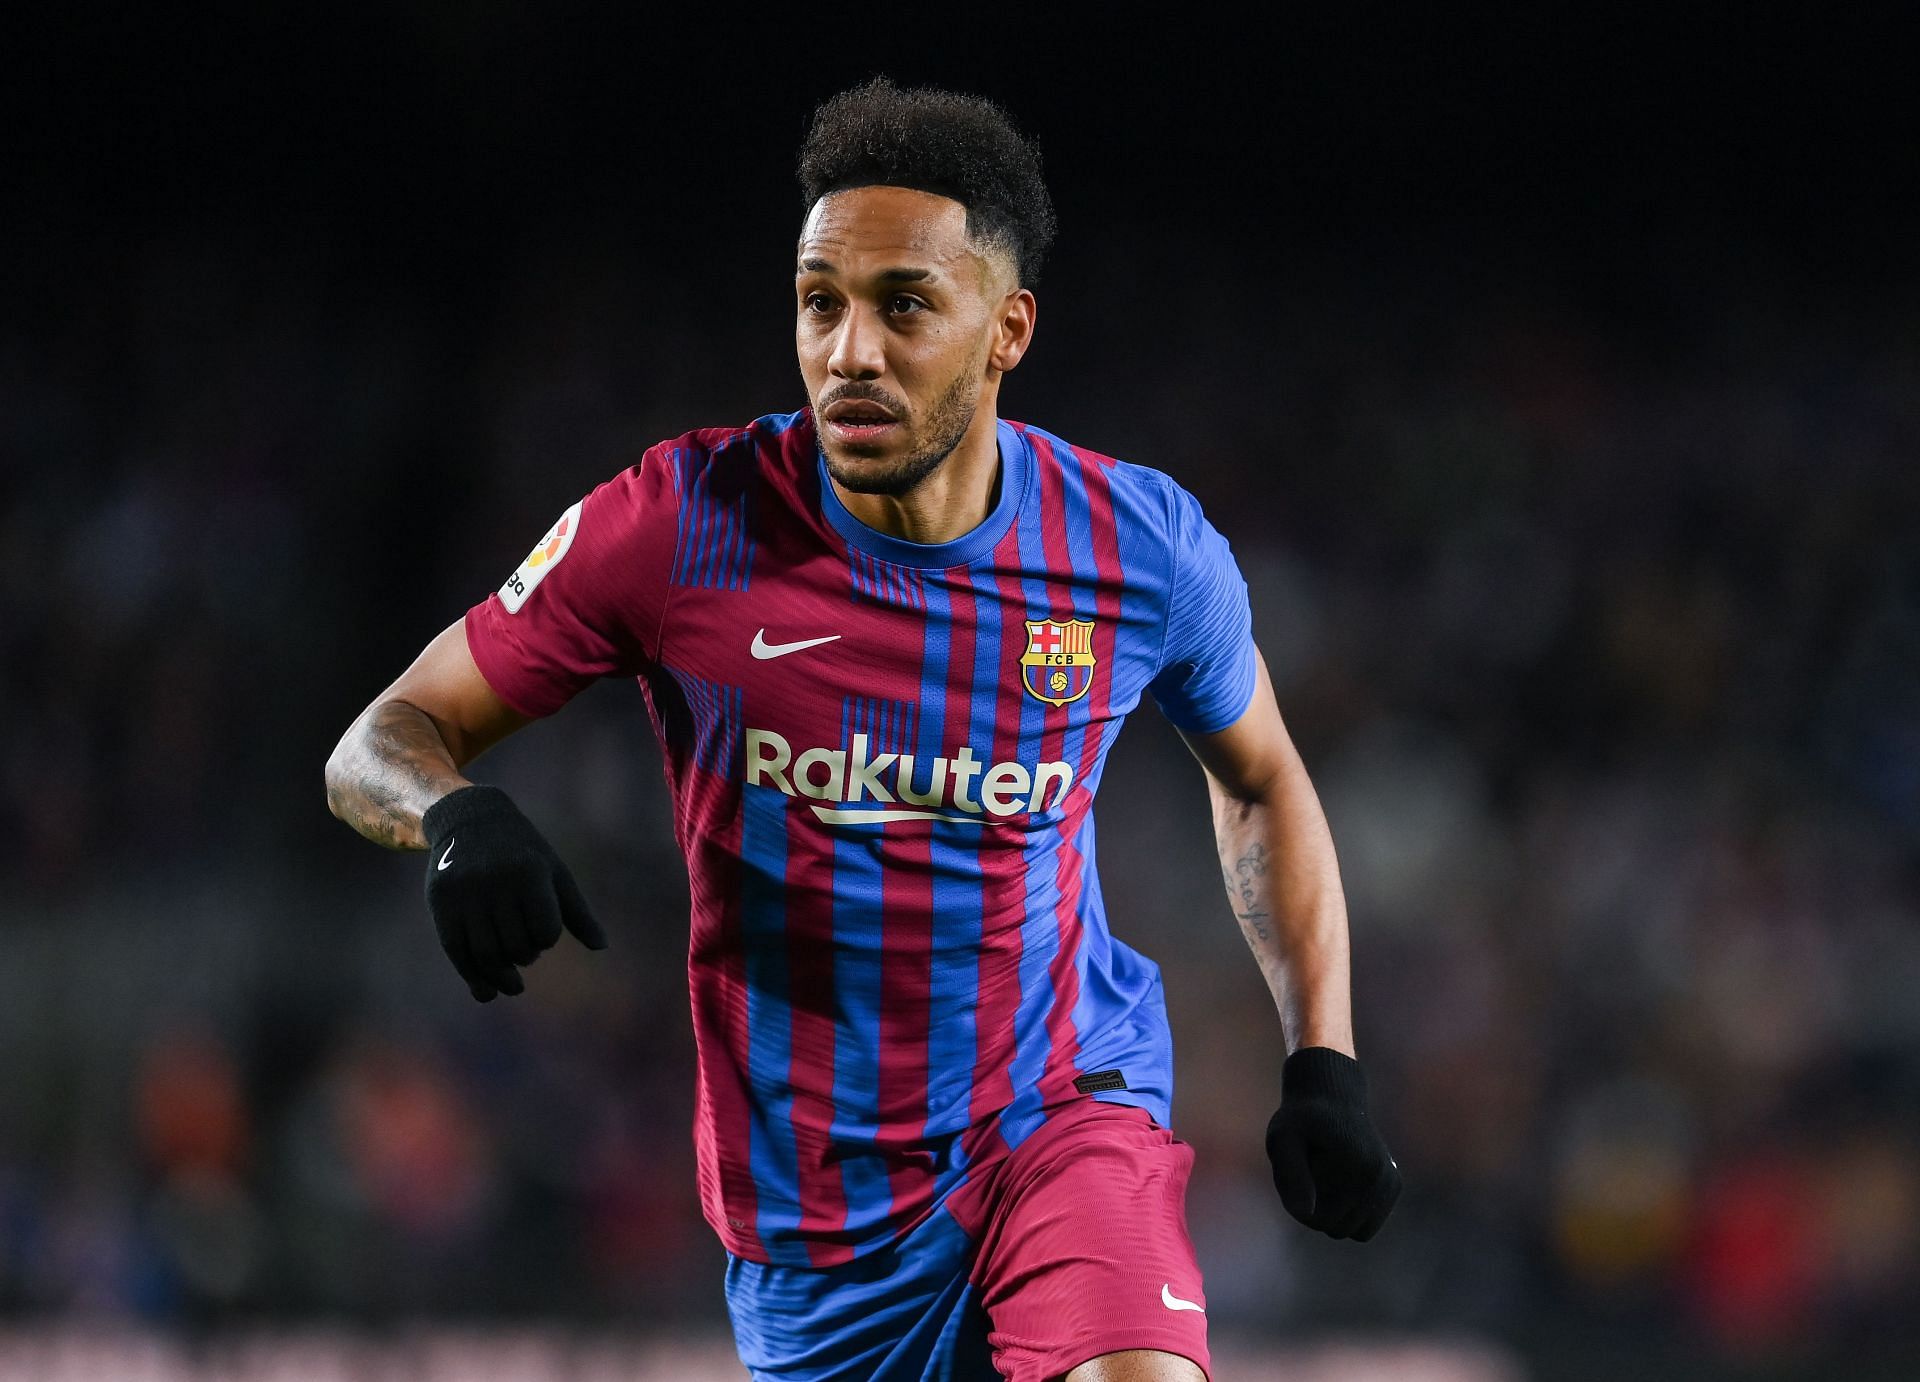 Pierre-Emerick Aubameyang&#039;s early goal helped the Blaugrana secure a narrow win over Real Sociedad